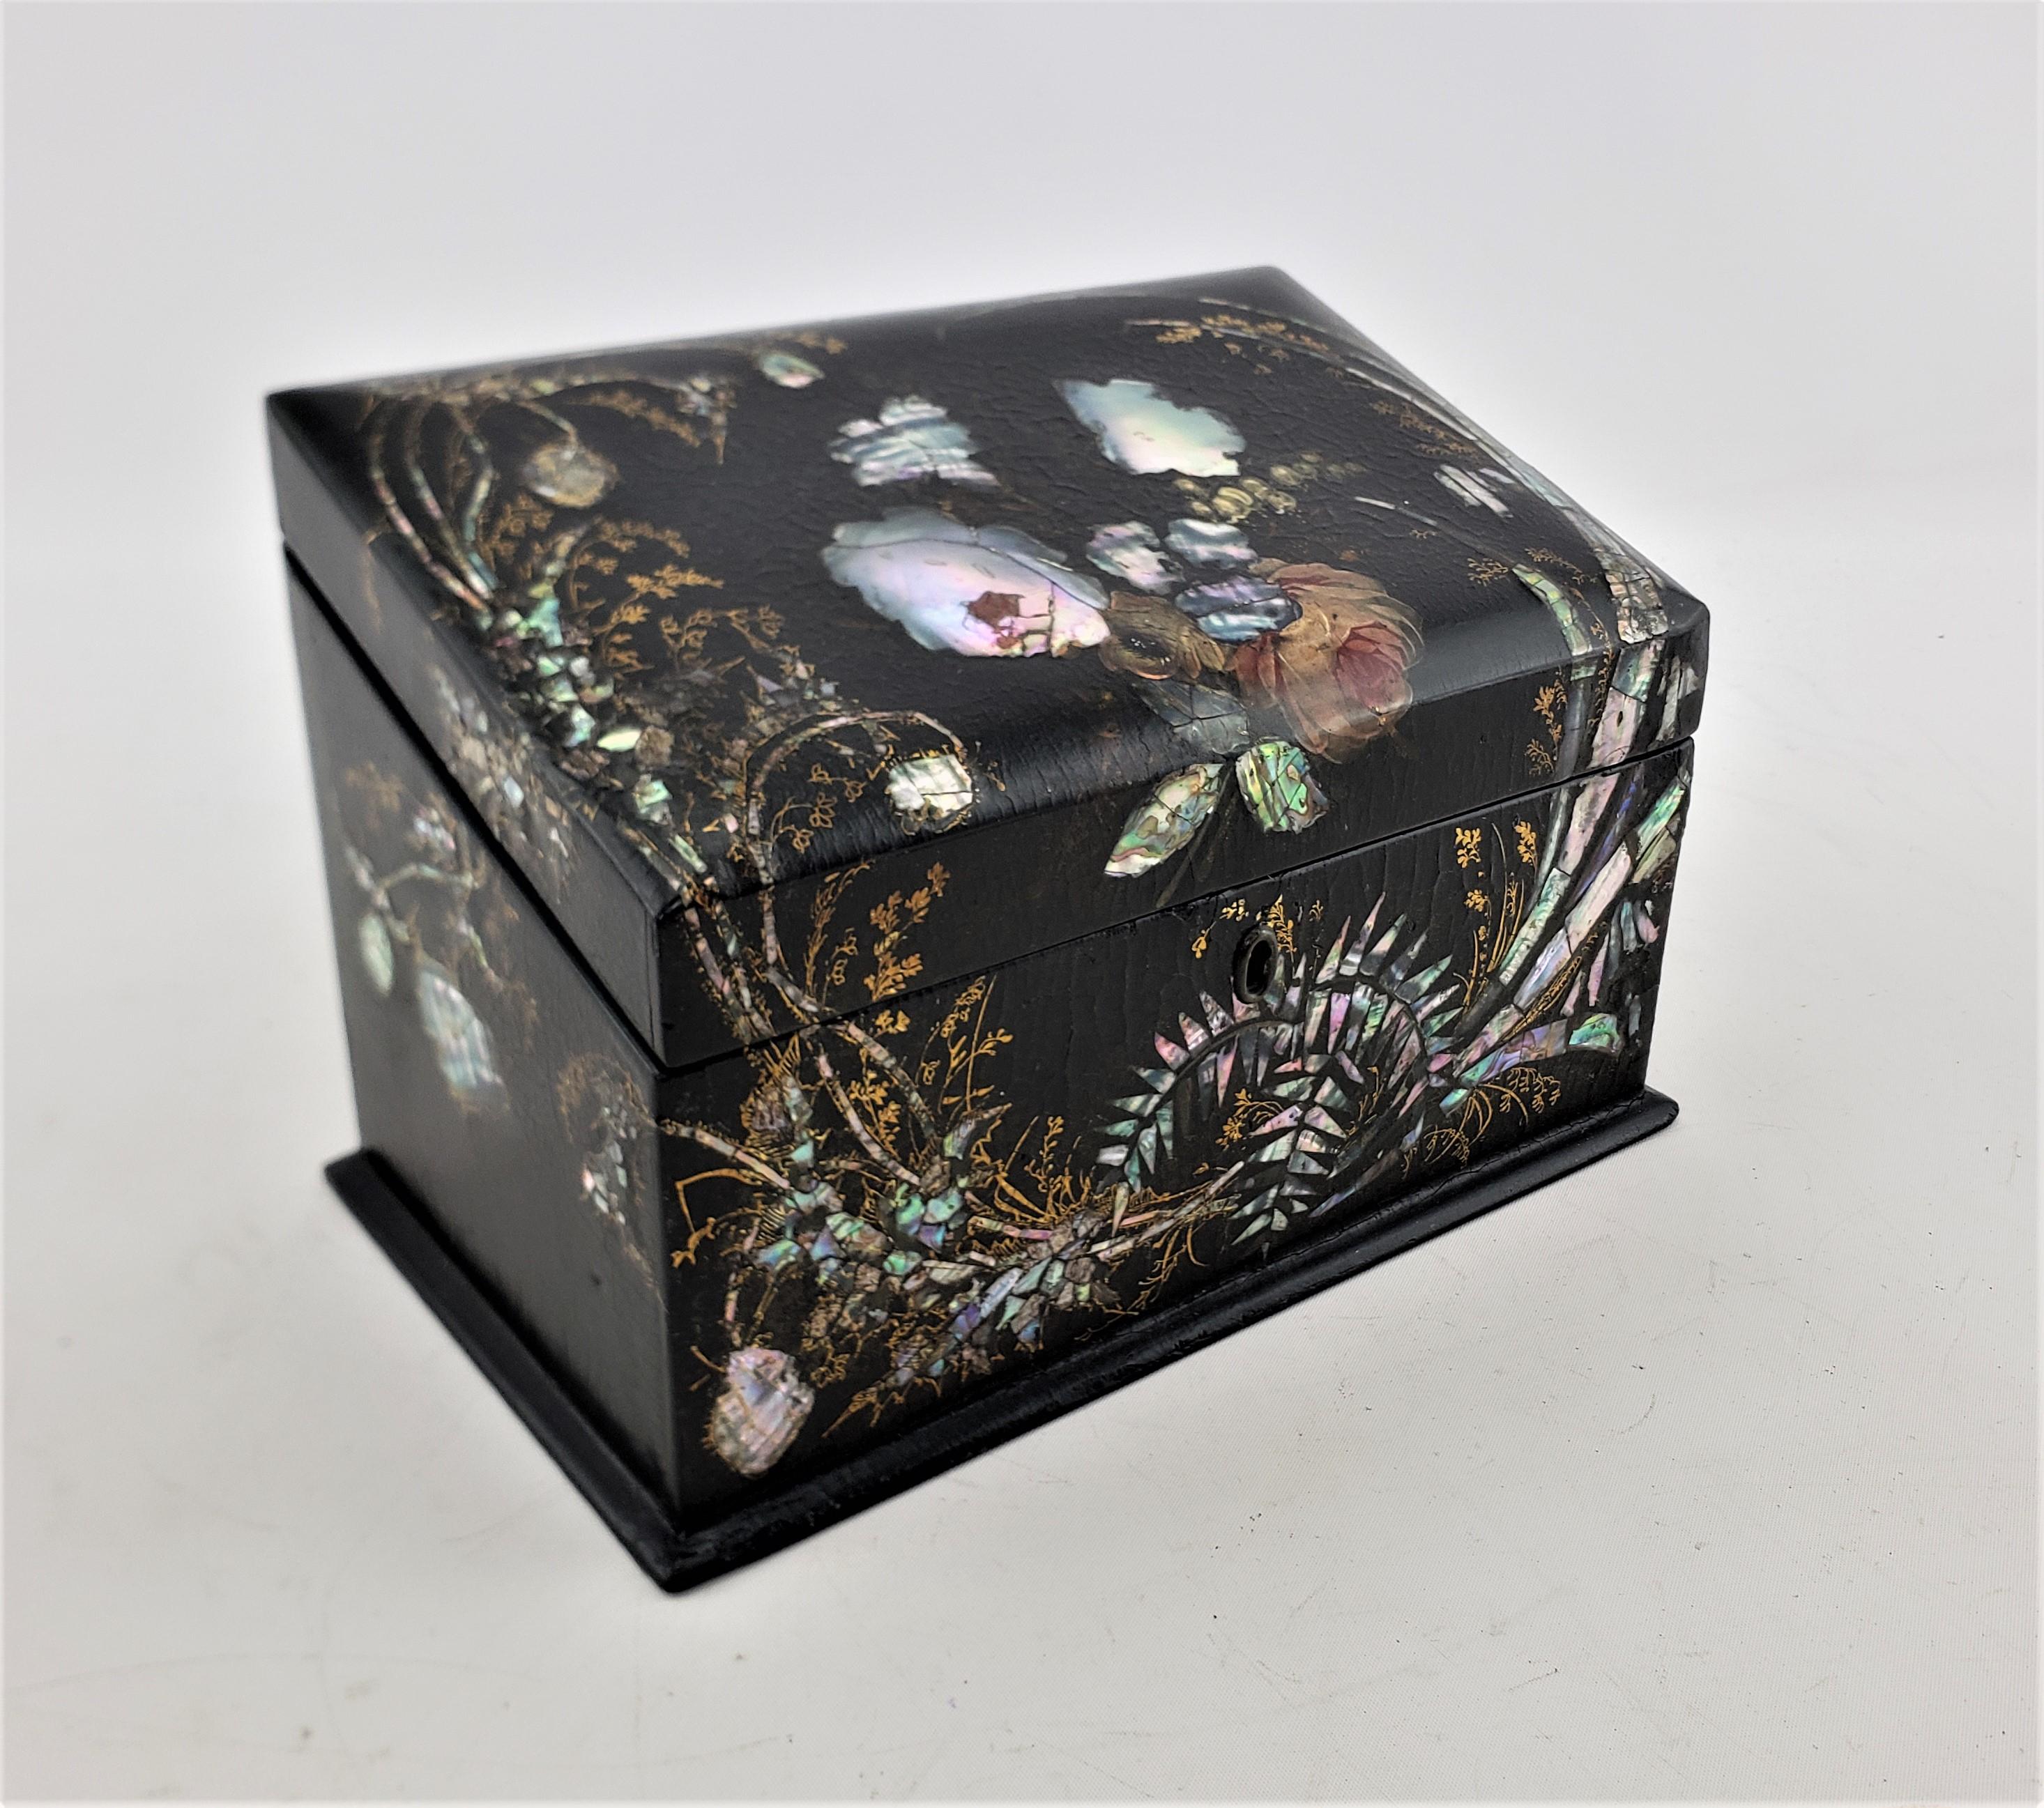 This antique trinket or jewelry box is unsigned, but presumed to have originated from England and date to approximately 1880 and done in the period Victorian style. The box is composed of paper mache which has been treated in black laquer with